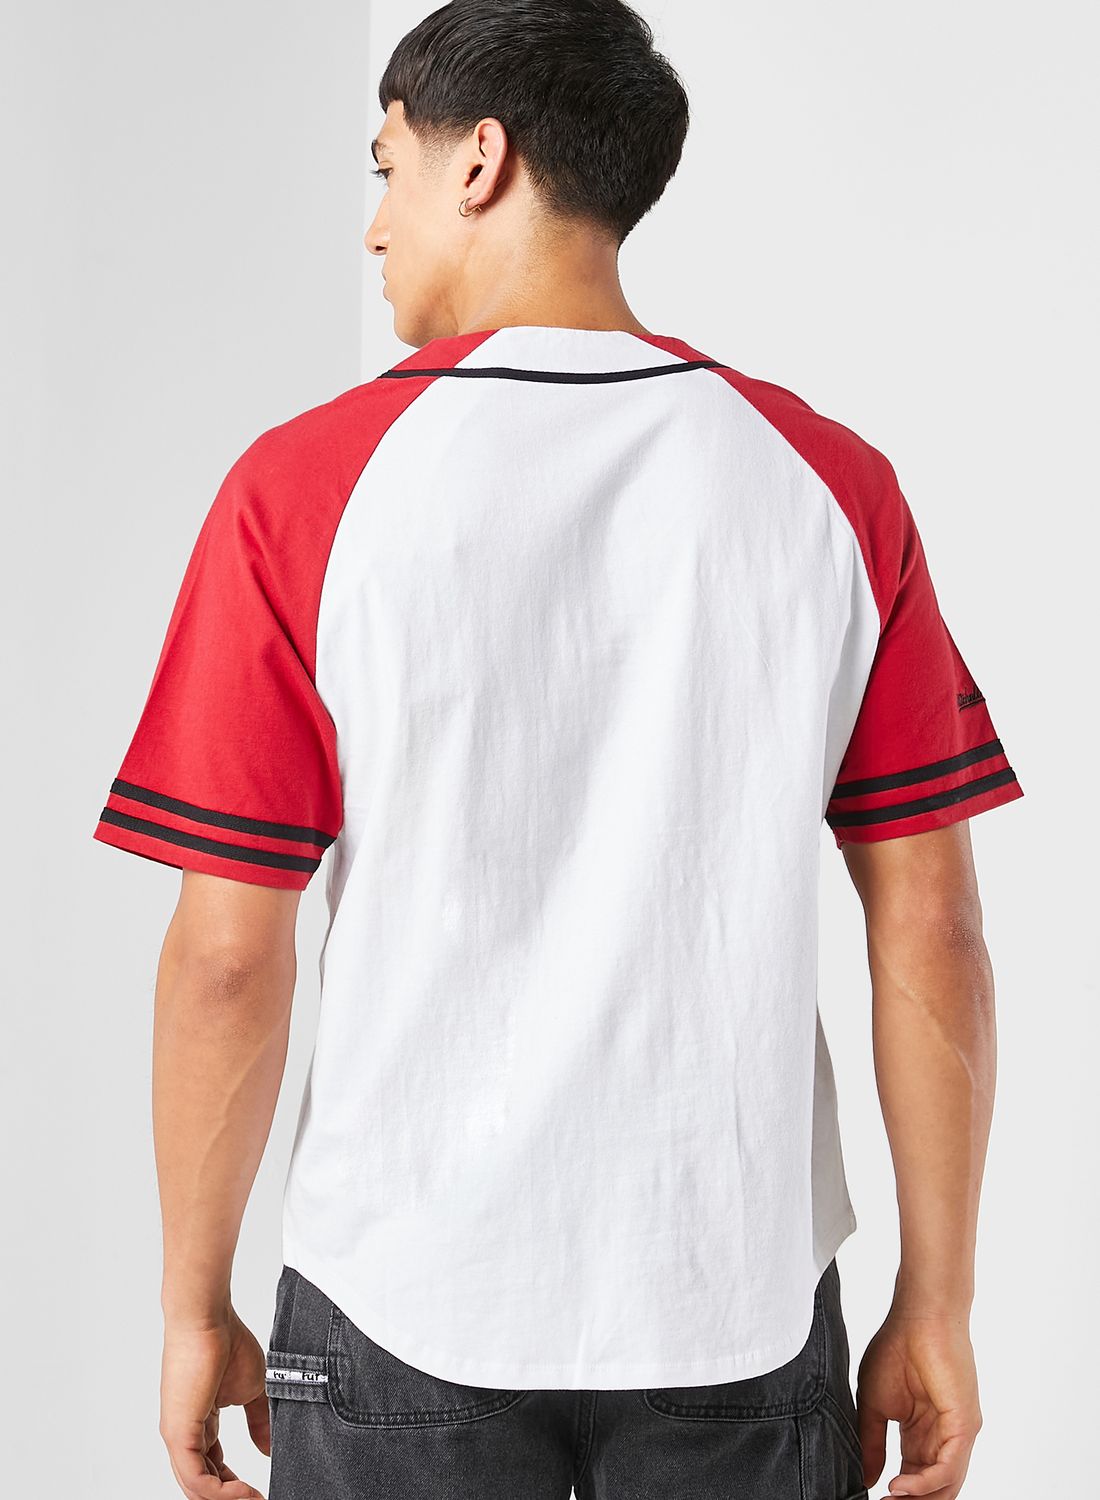 Mitchell&Ness - Practice Day Buttom Front Jersey Chicago Bulls